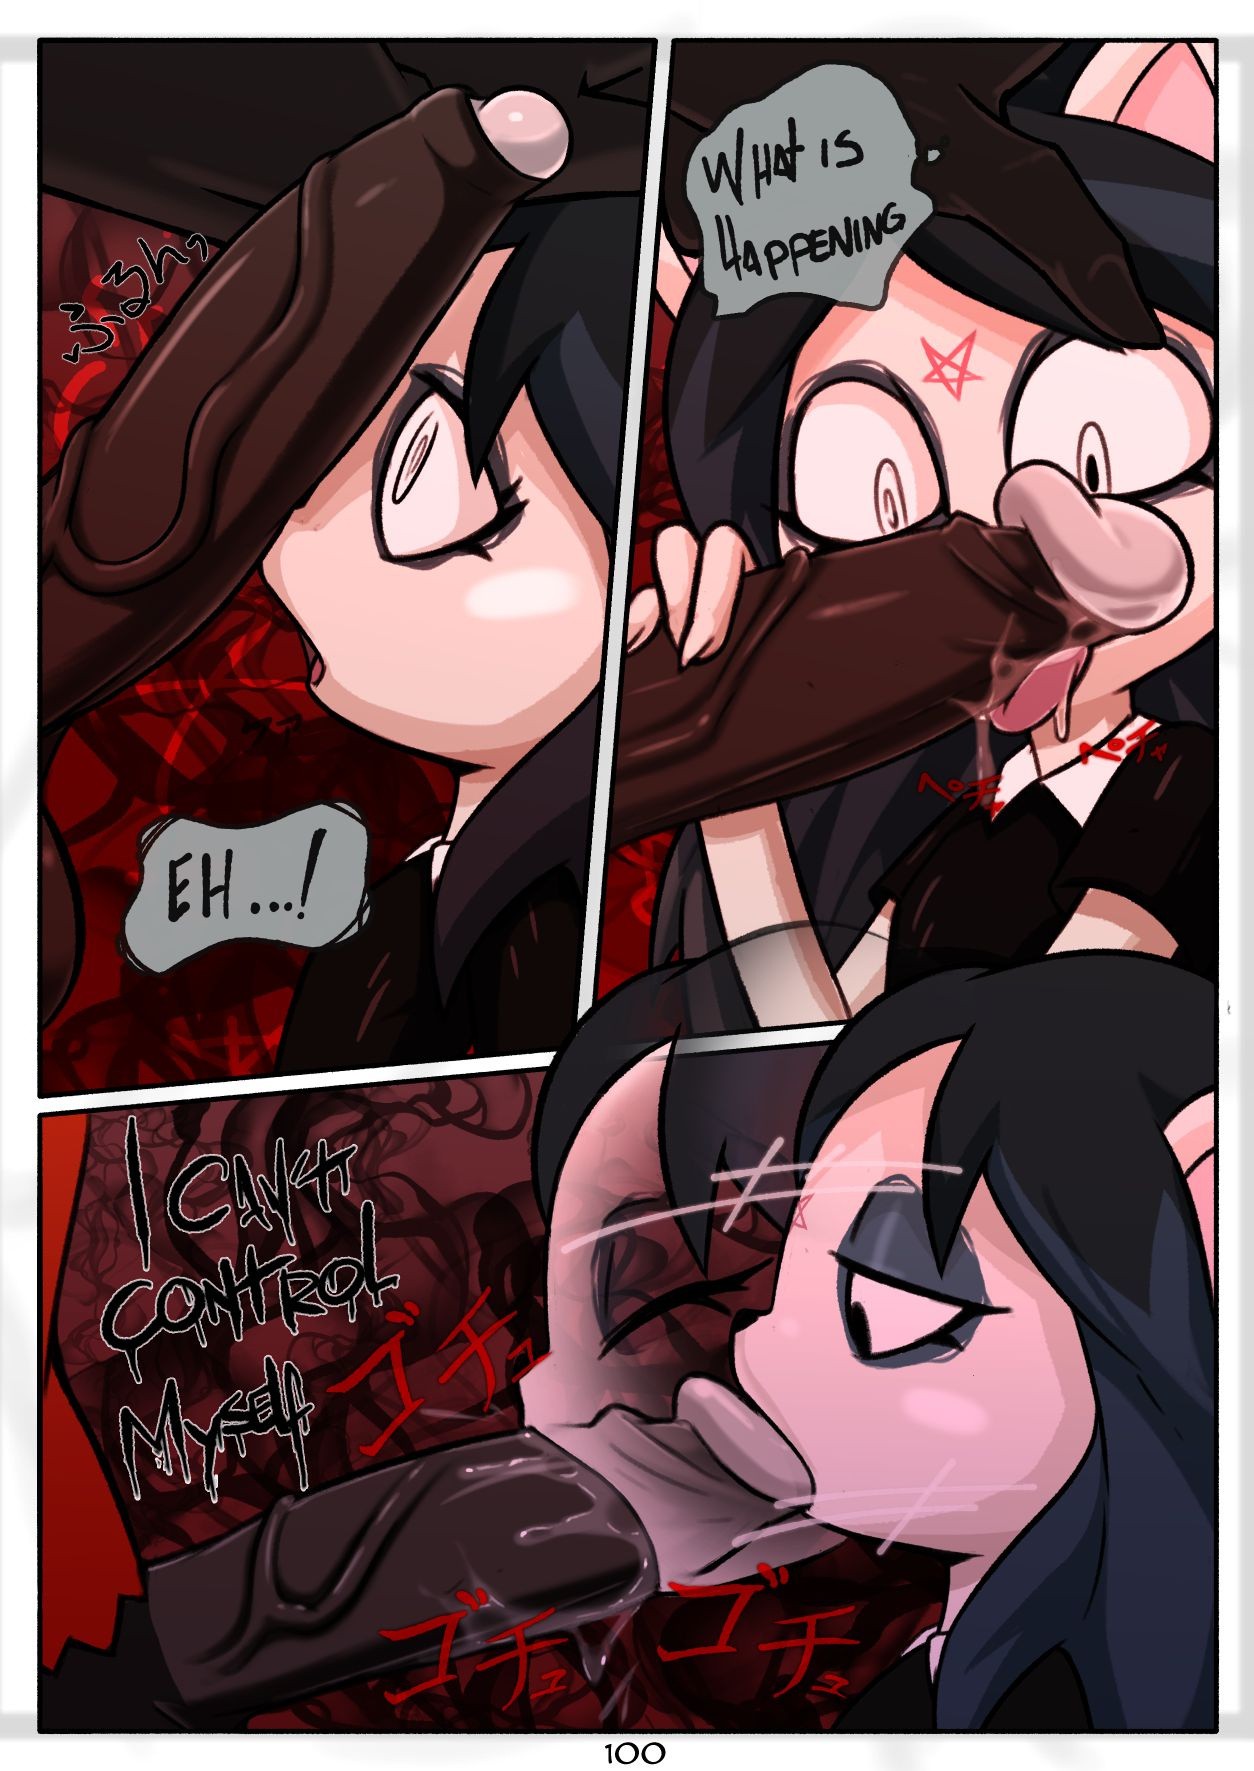 The Offering - N3f porn comic picture 5